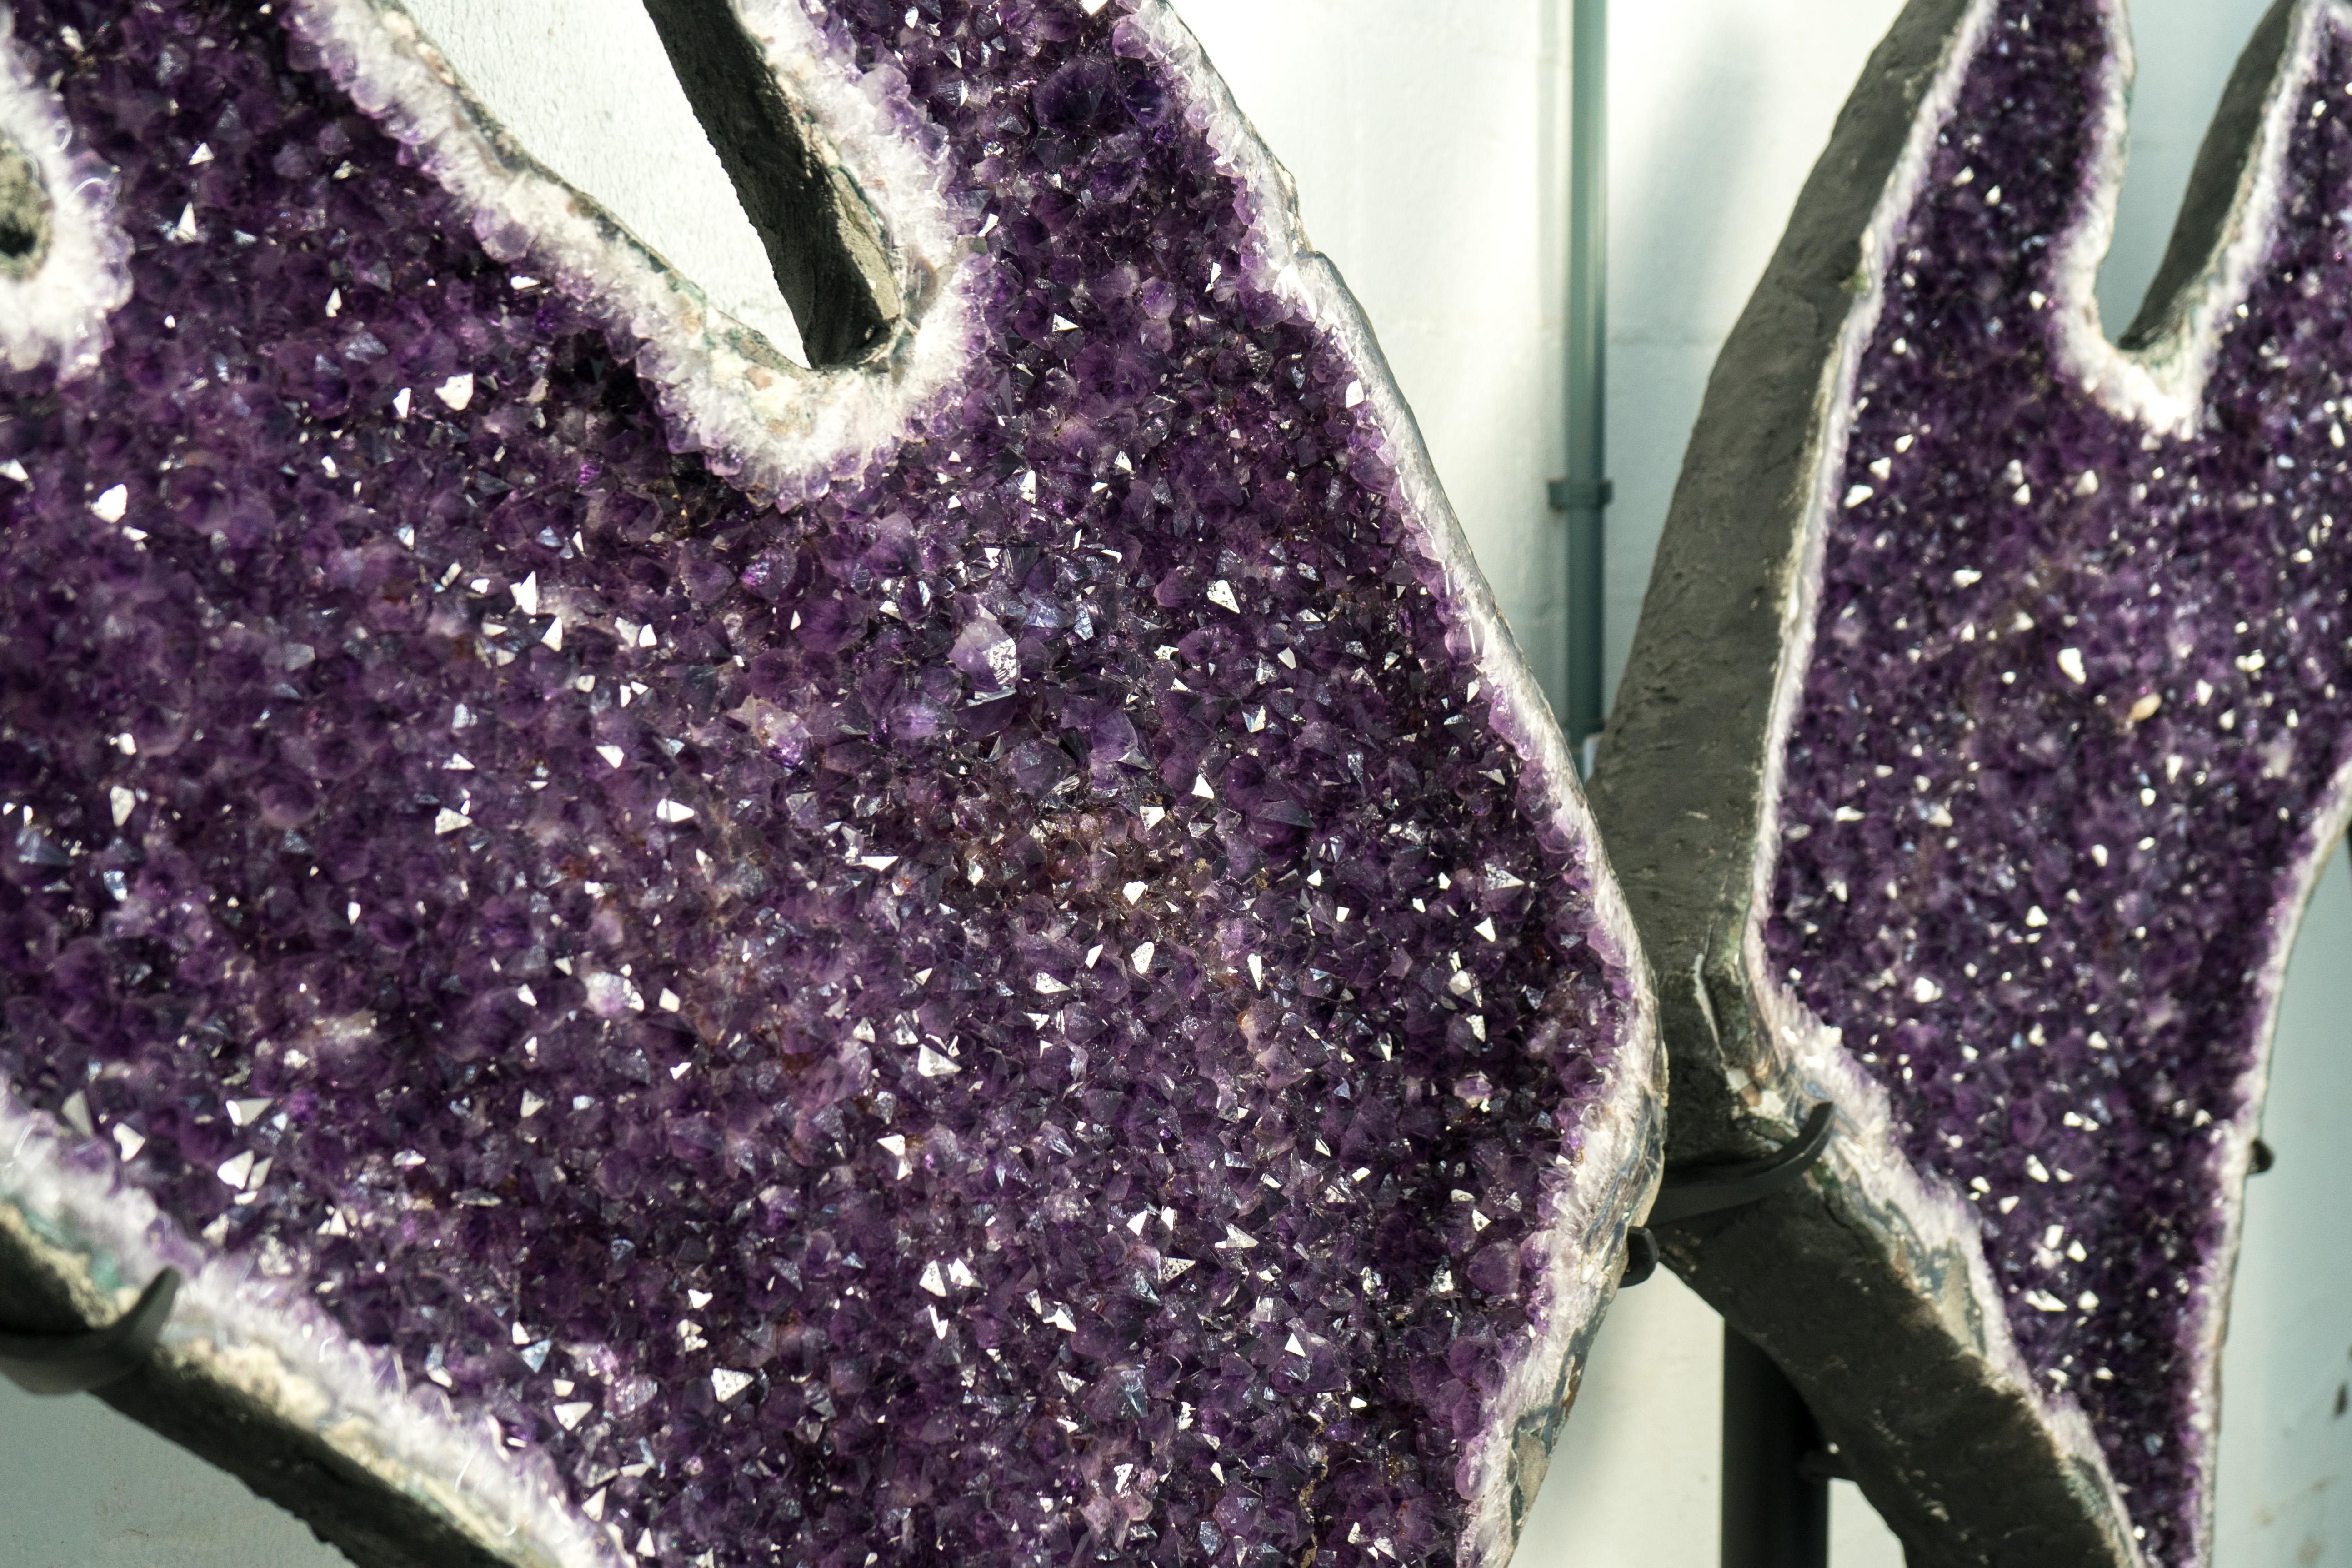 Sculptural 7 Ft Tall Giant Amethyst Geodes with High-Grade Deep Purple Amethyst For Sale 1